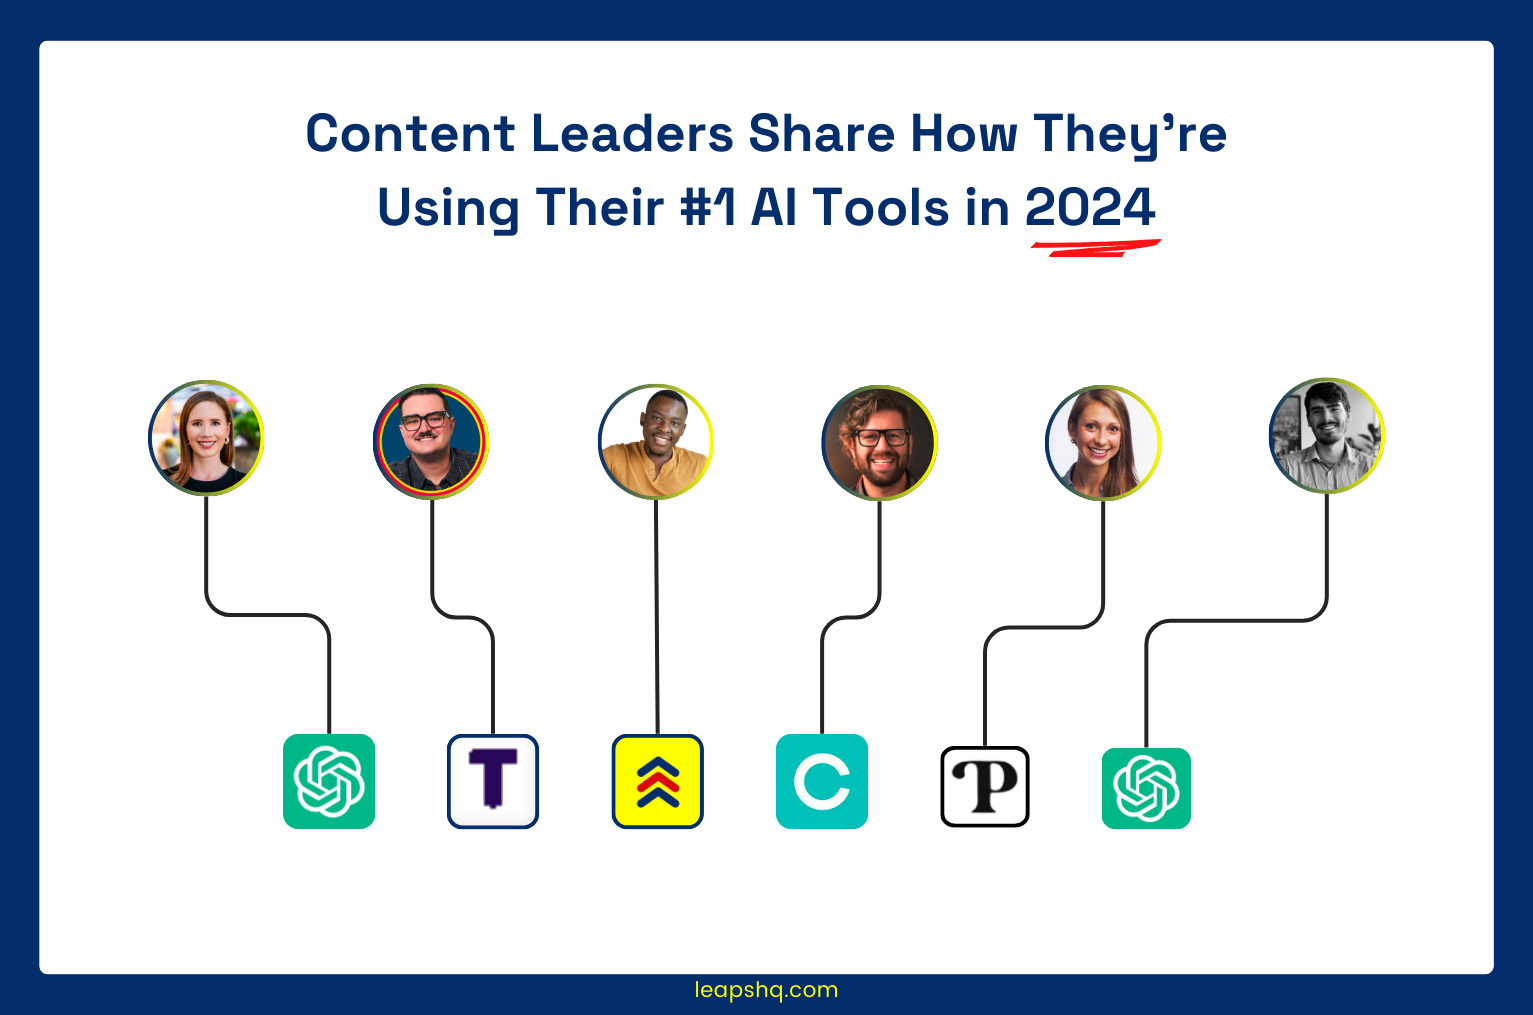 Content Leaders Reveal Their #1 AI Content Tools For 2024 (And Use Cases)